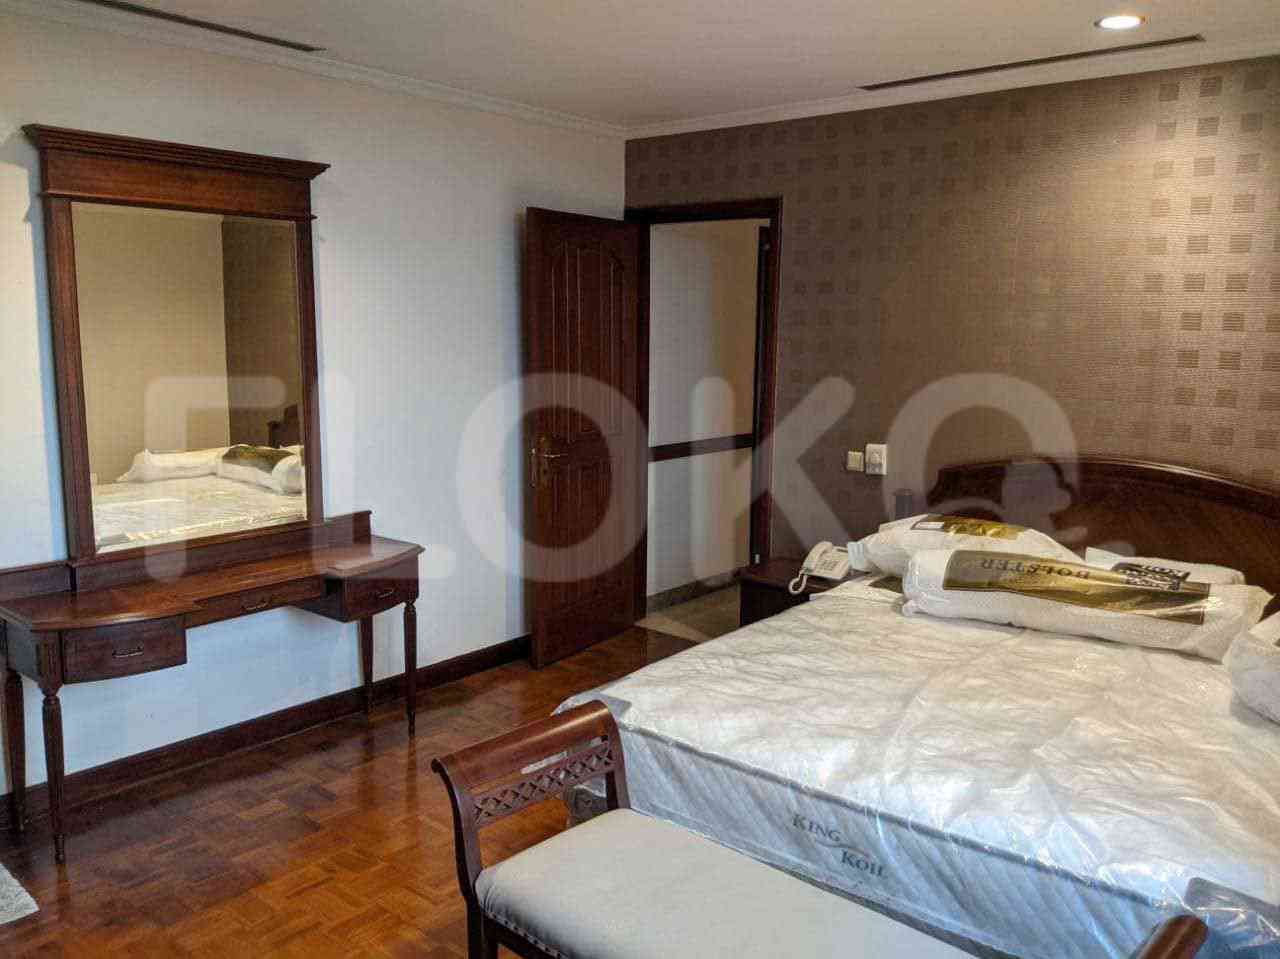 2 Bedroom on 15th Floor for Rent in Kusuma Chandra Apartment  - fsud66 5